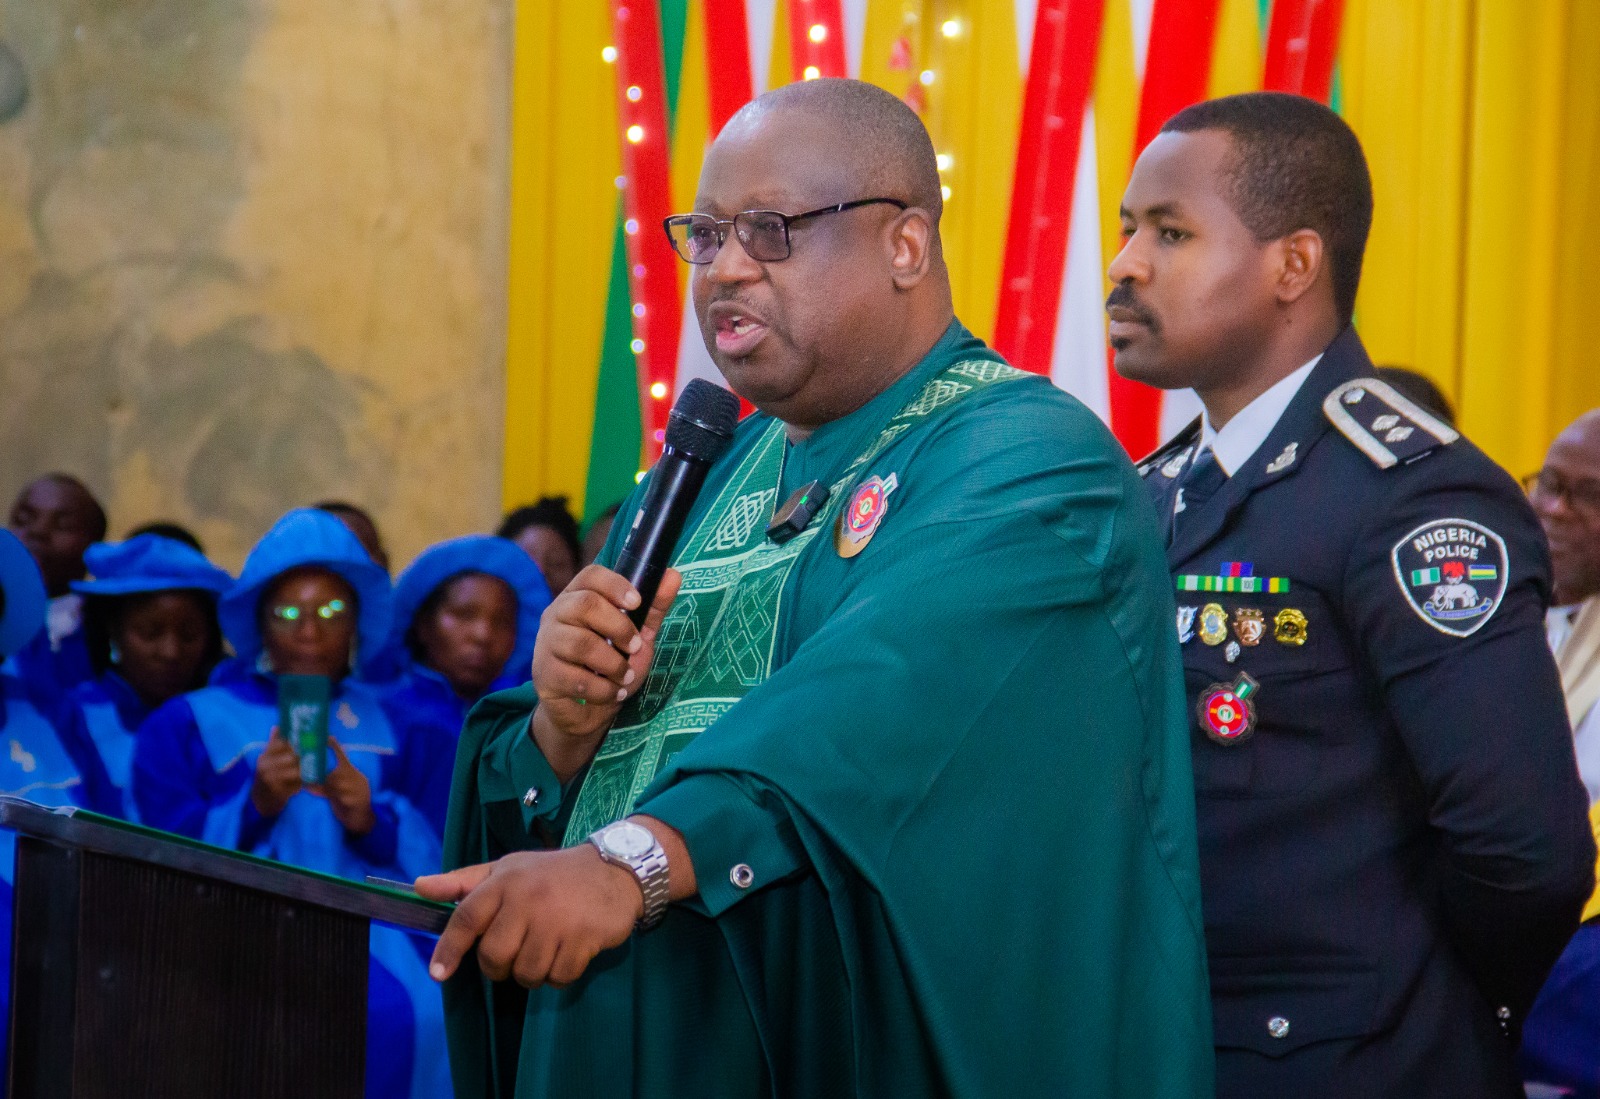 “We’ll Provide Enabling Environment for the Armed Forces to Protect Nigerians” – Gov. Mutfwang